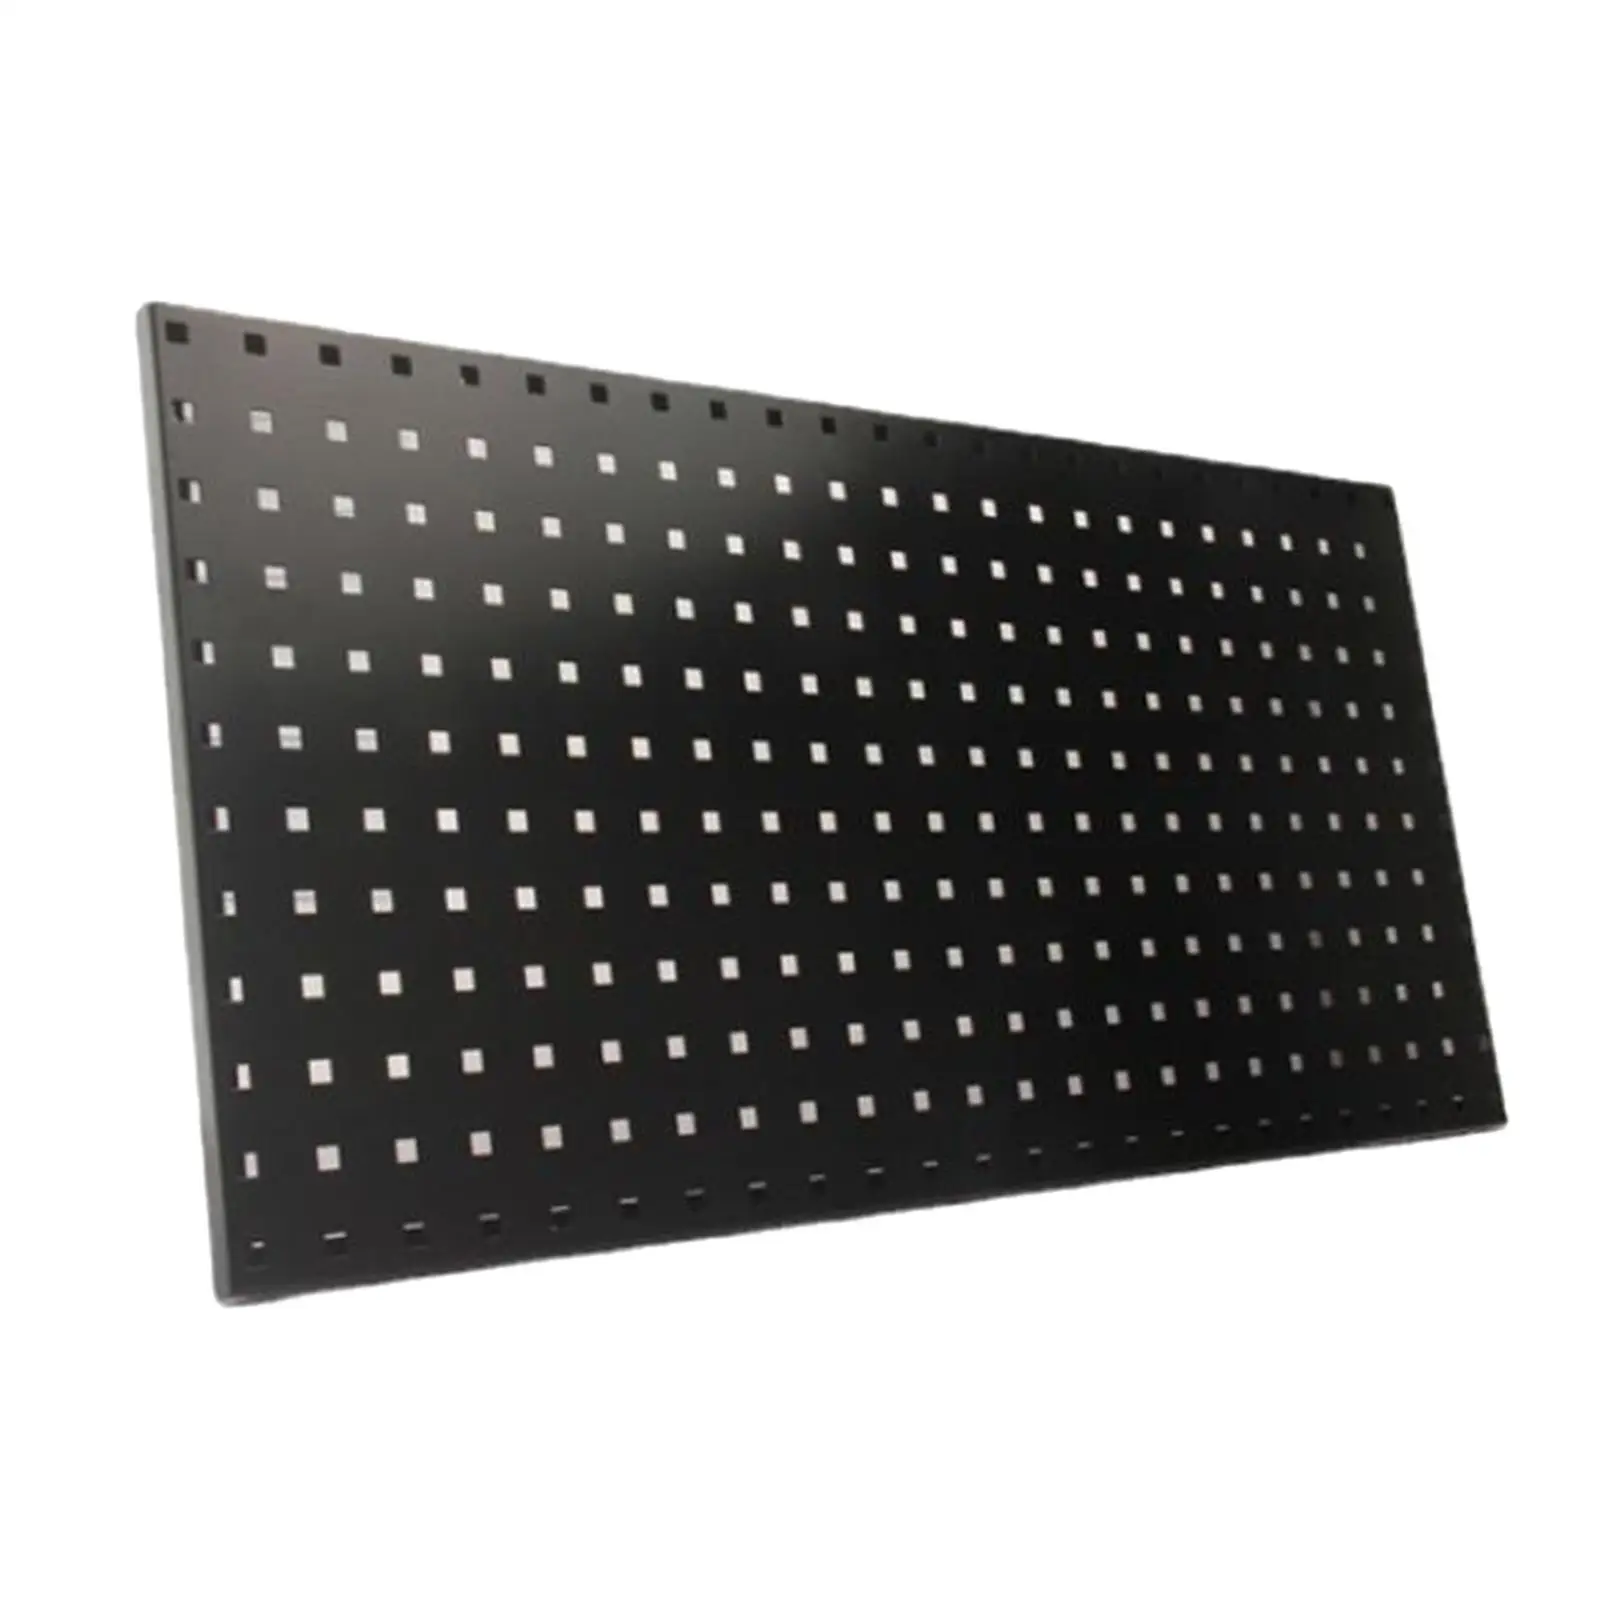 Pegboard Wall Organizer Pegboard Panels Peg Boards Pegboard Wall Mount Display for Kitchen